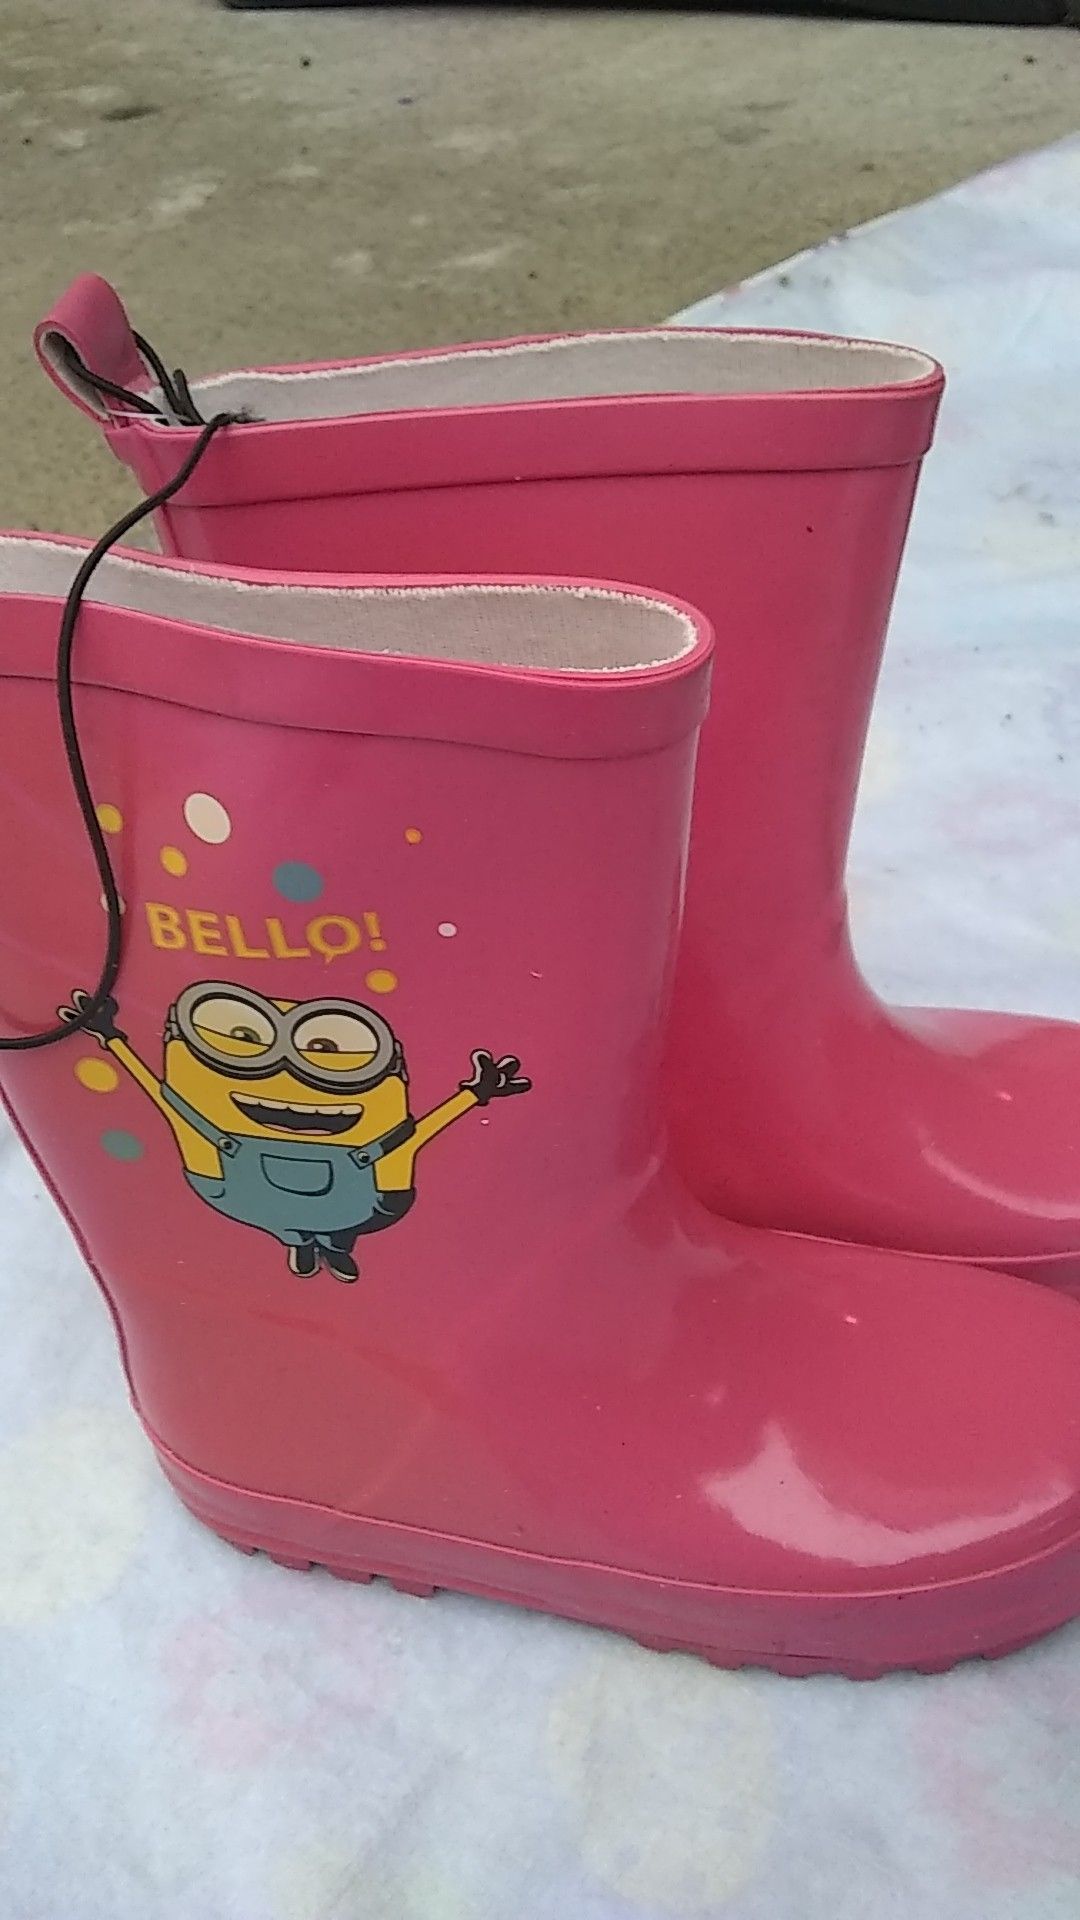 Never worn new, Despicable meSize 27 28 we should be a size 8 or 9 girls rain boots